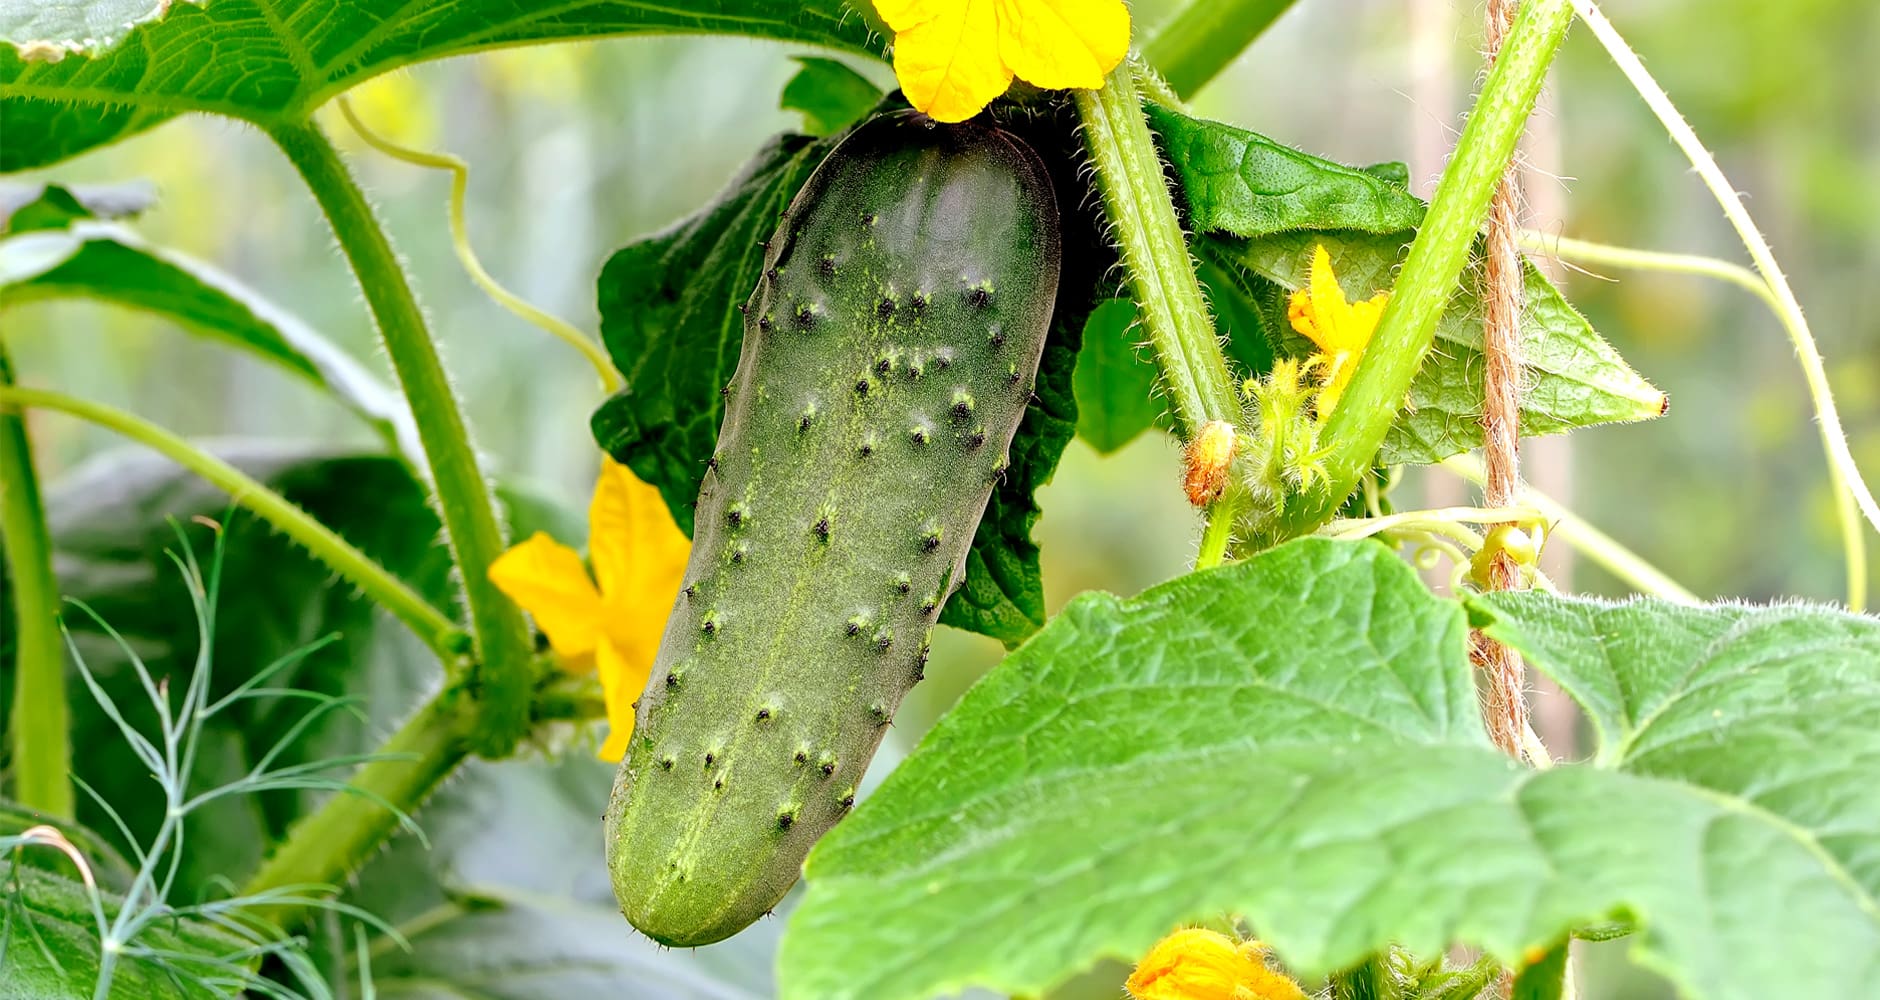 Cucumber growing on the vine.